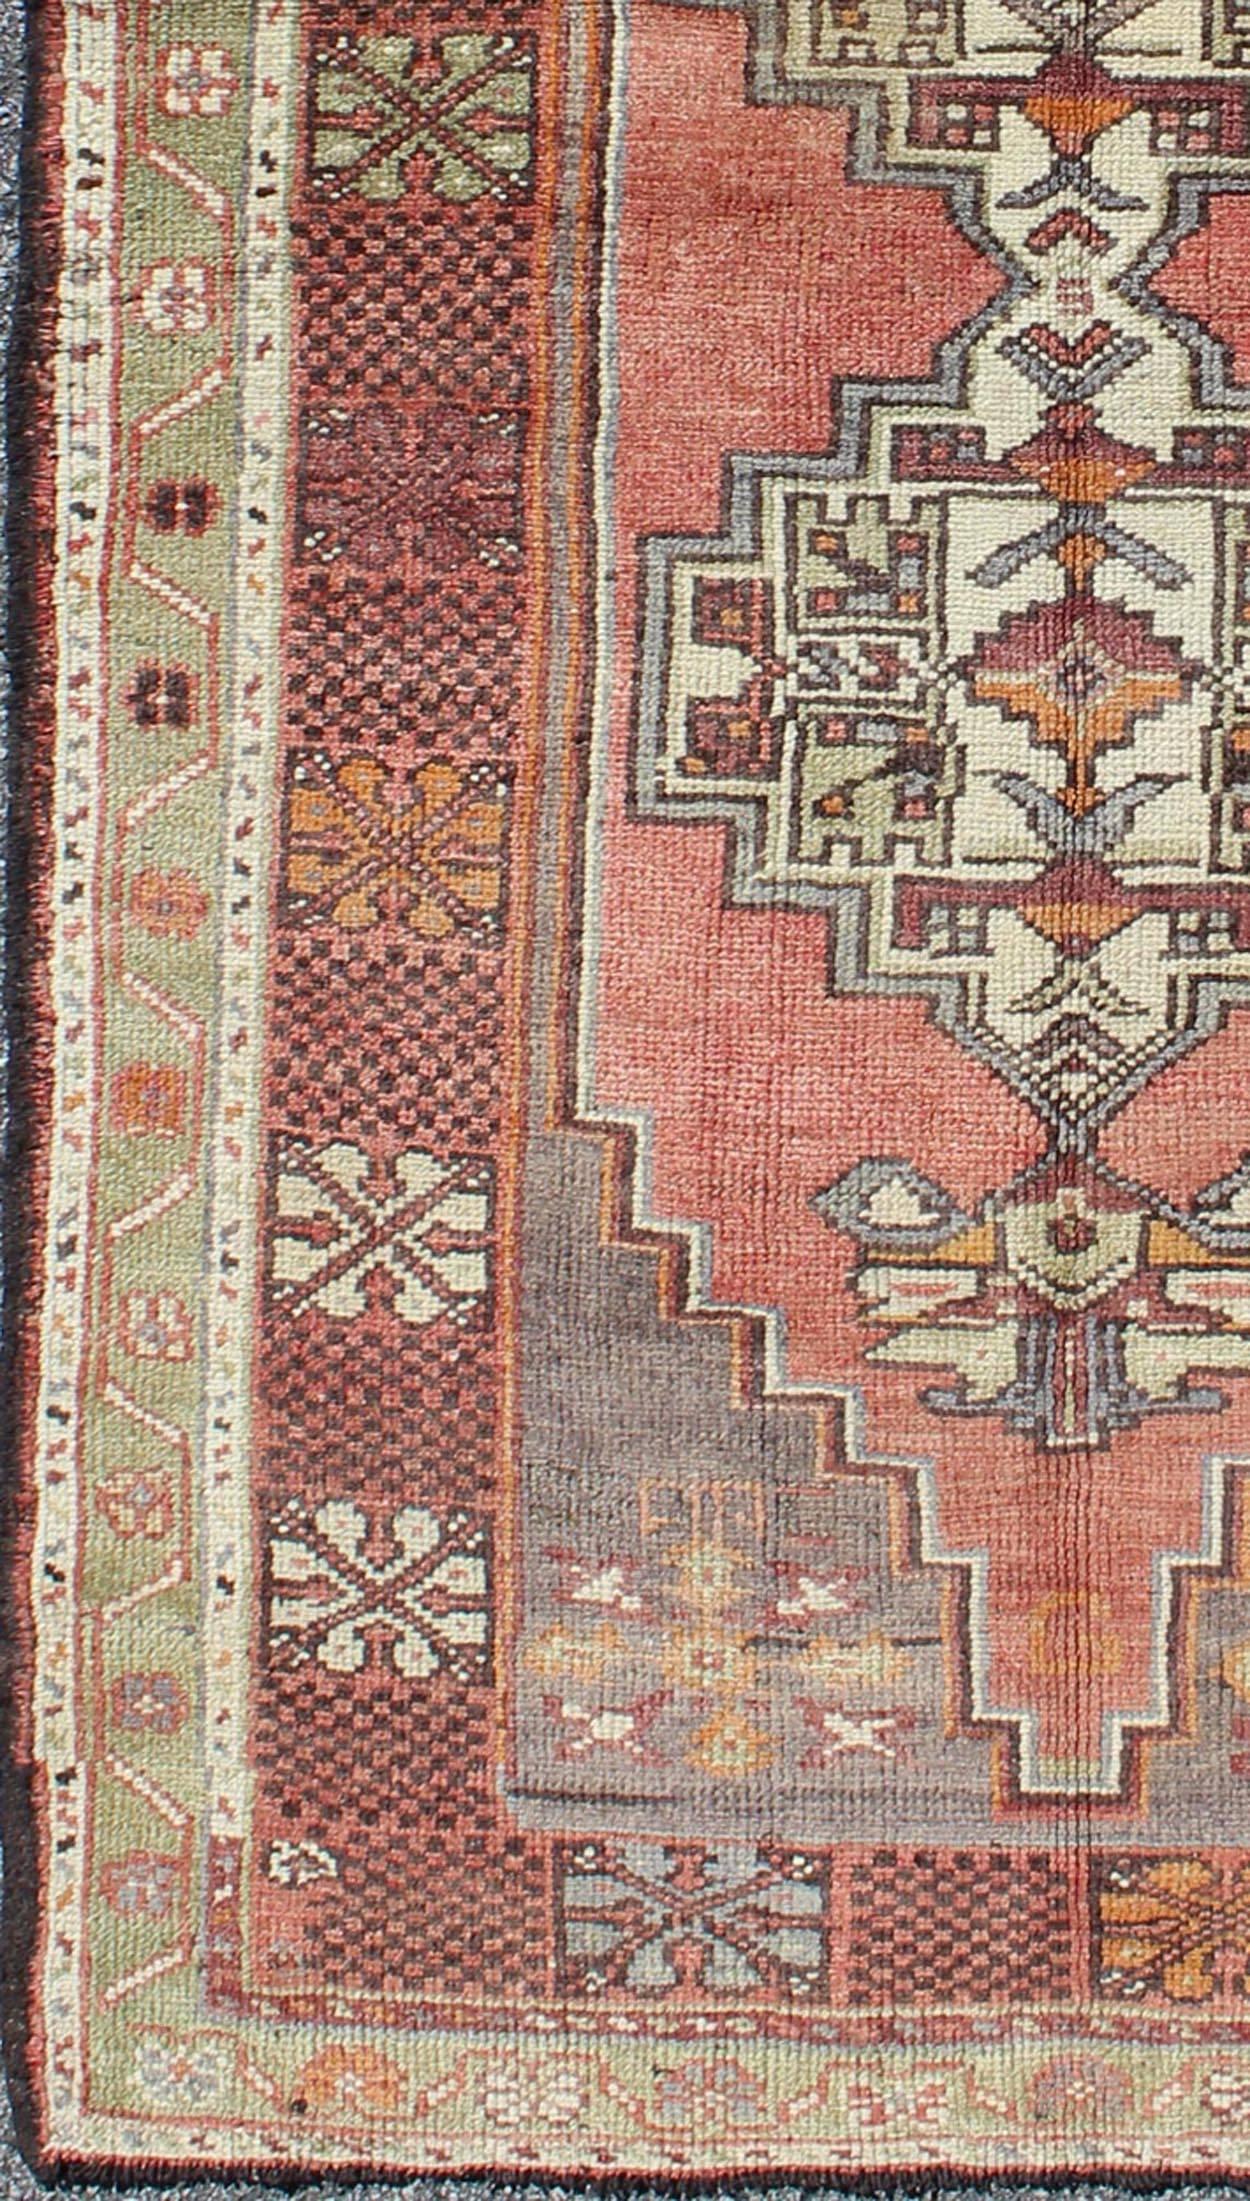 Soft red and green vintage Turkish Oushak rug with sub-geometric dual medallions, rug tu-trs-3435, country of origin / type: Turkey / Oushak, circa 1940

This Turkish runner features a dual central medallion design as well as patterns of smaller